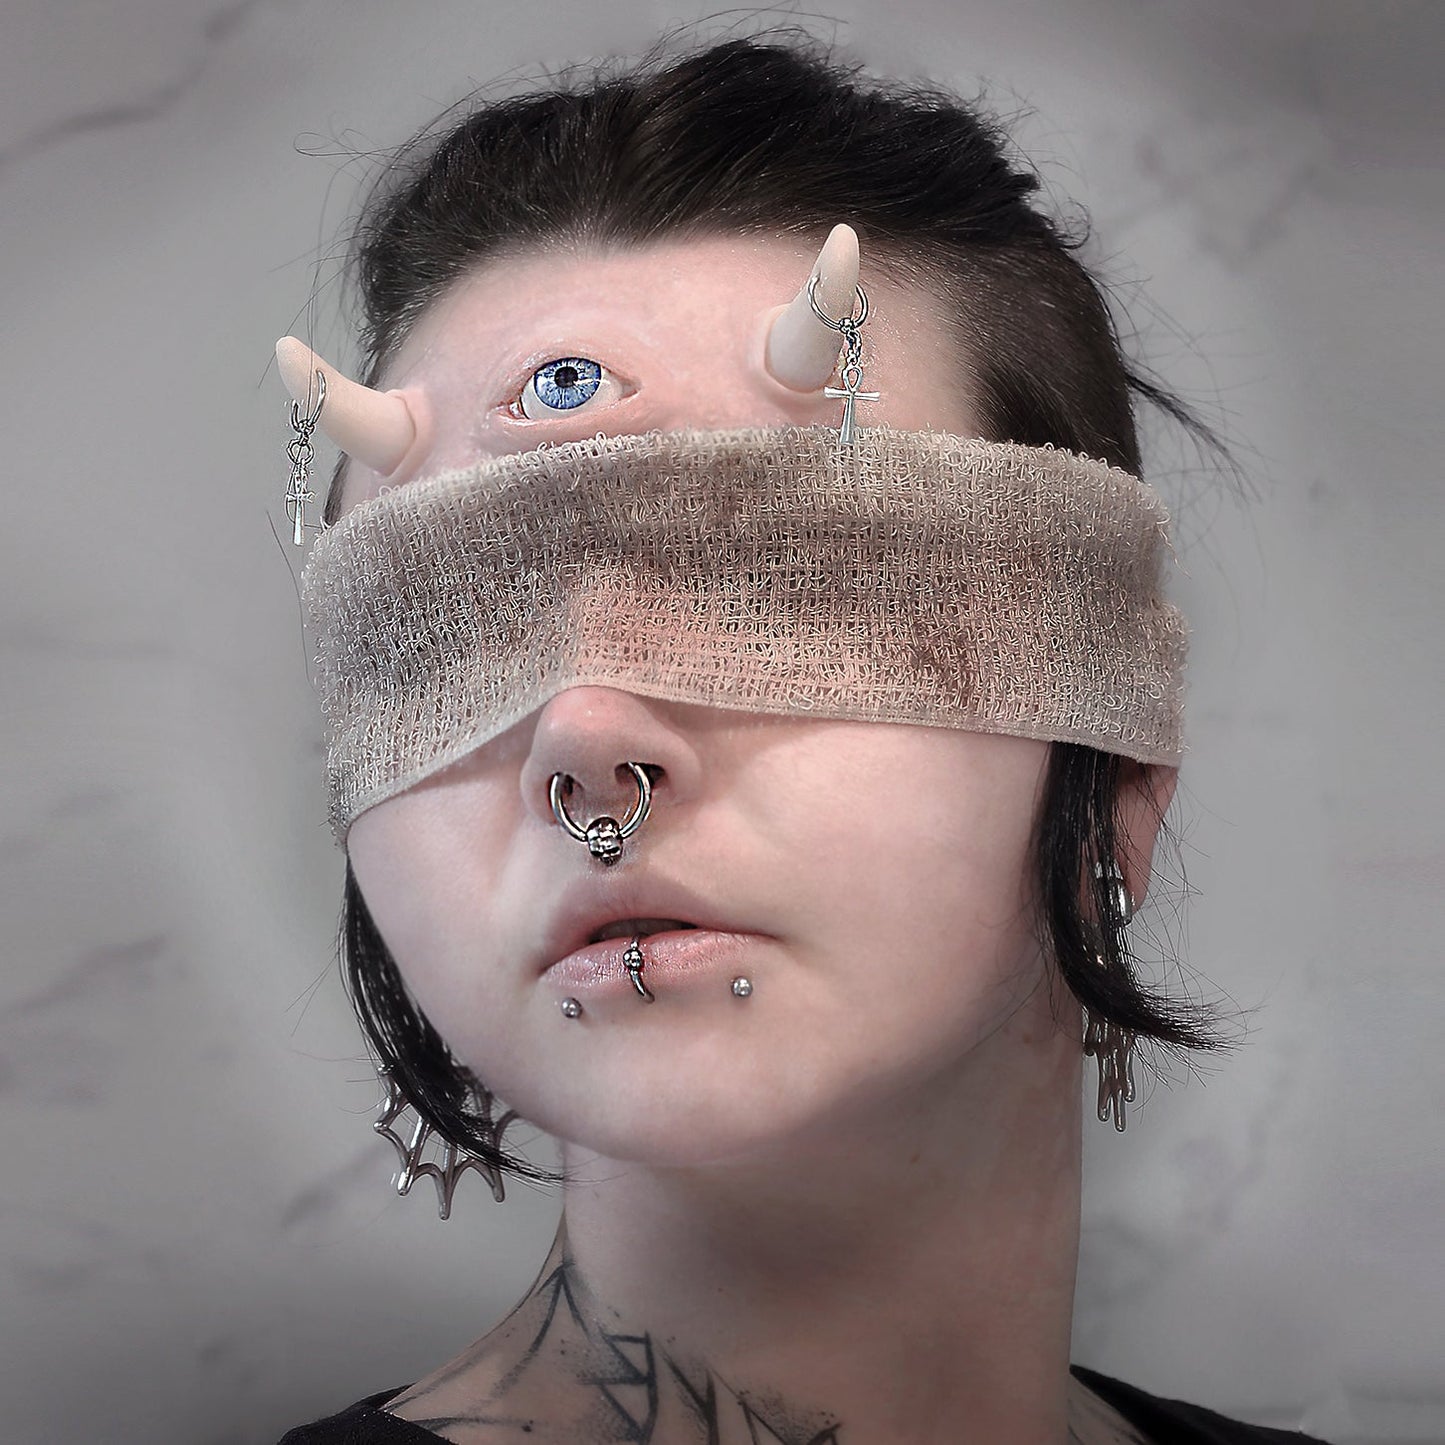 Woman in a blindfold wearing pierced horns and third eye prosthetic